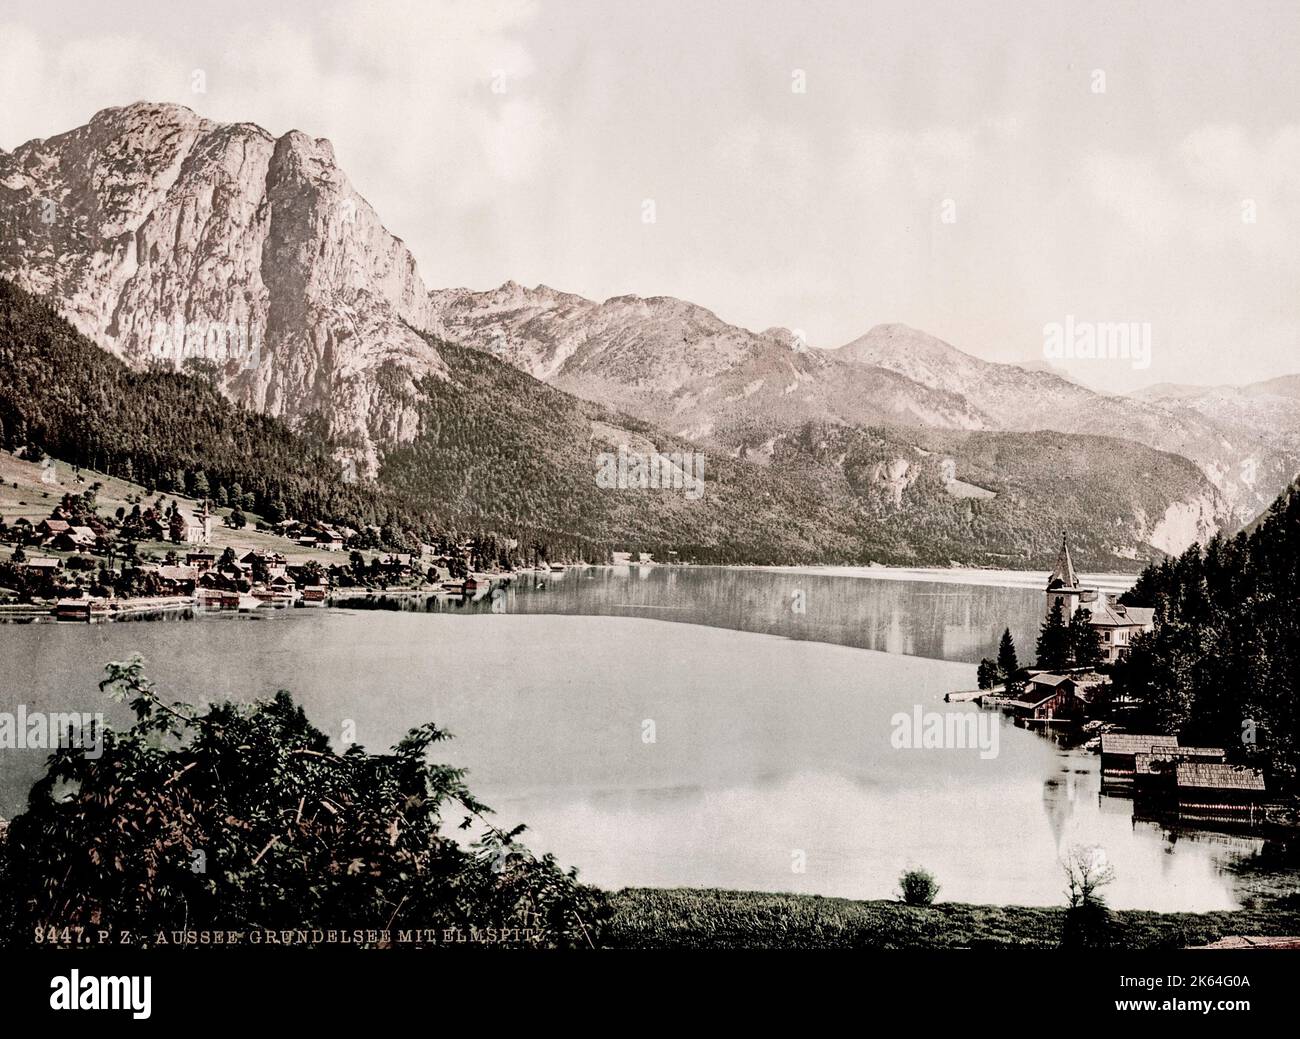 Vintage 19th century / 1900 photograph: Grundlsee, a municipality in the Liezen District of Styria, Austria. Stock Photo